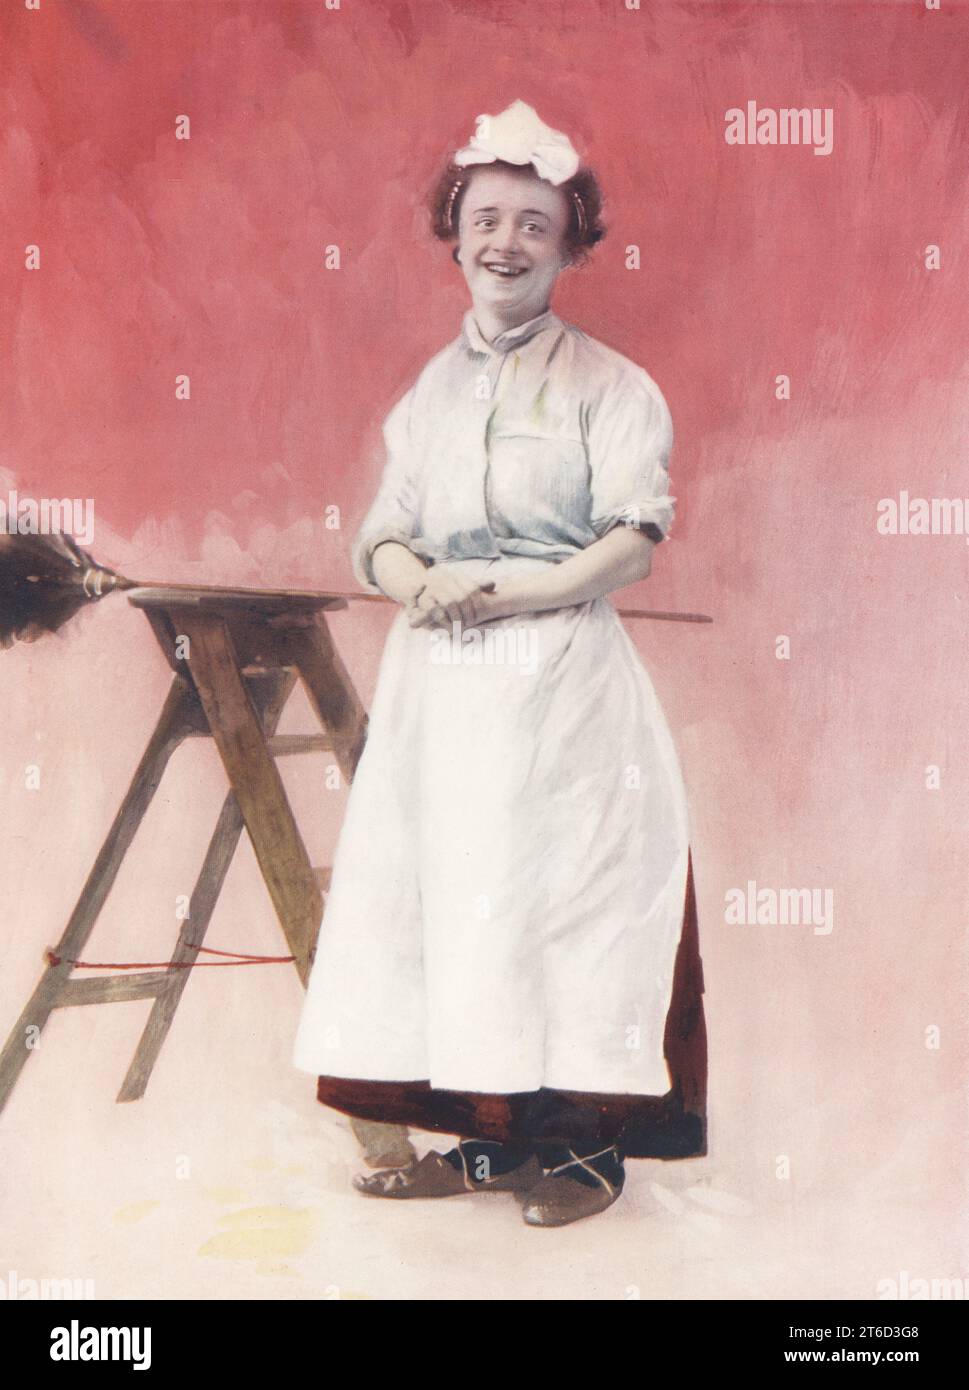 Miss Louie Freear as Flo Honeydew in The Lady Slavey, an operetta based on Cinderella by George Dance and John Crook, Royal Avenue Theatre, 1894. Louisa Freear, English actress, singer and comedienne, 1871-1939. Photograph by Alfred Ellis and Walery (Stanislaw Julian Ignacy). Colour printing of a hand-coloured illustration based on a monochrome photograph from George Newness Players of the Day, London, 1905. Stock Photo